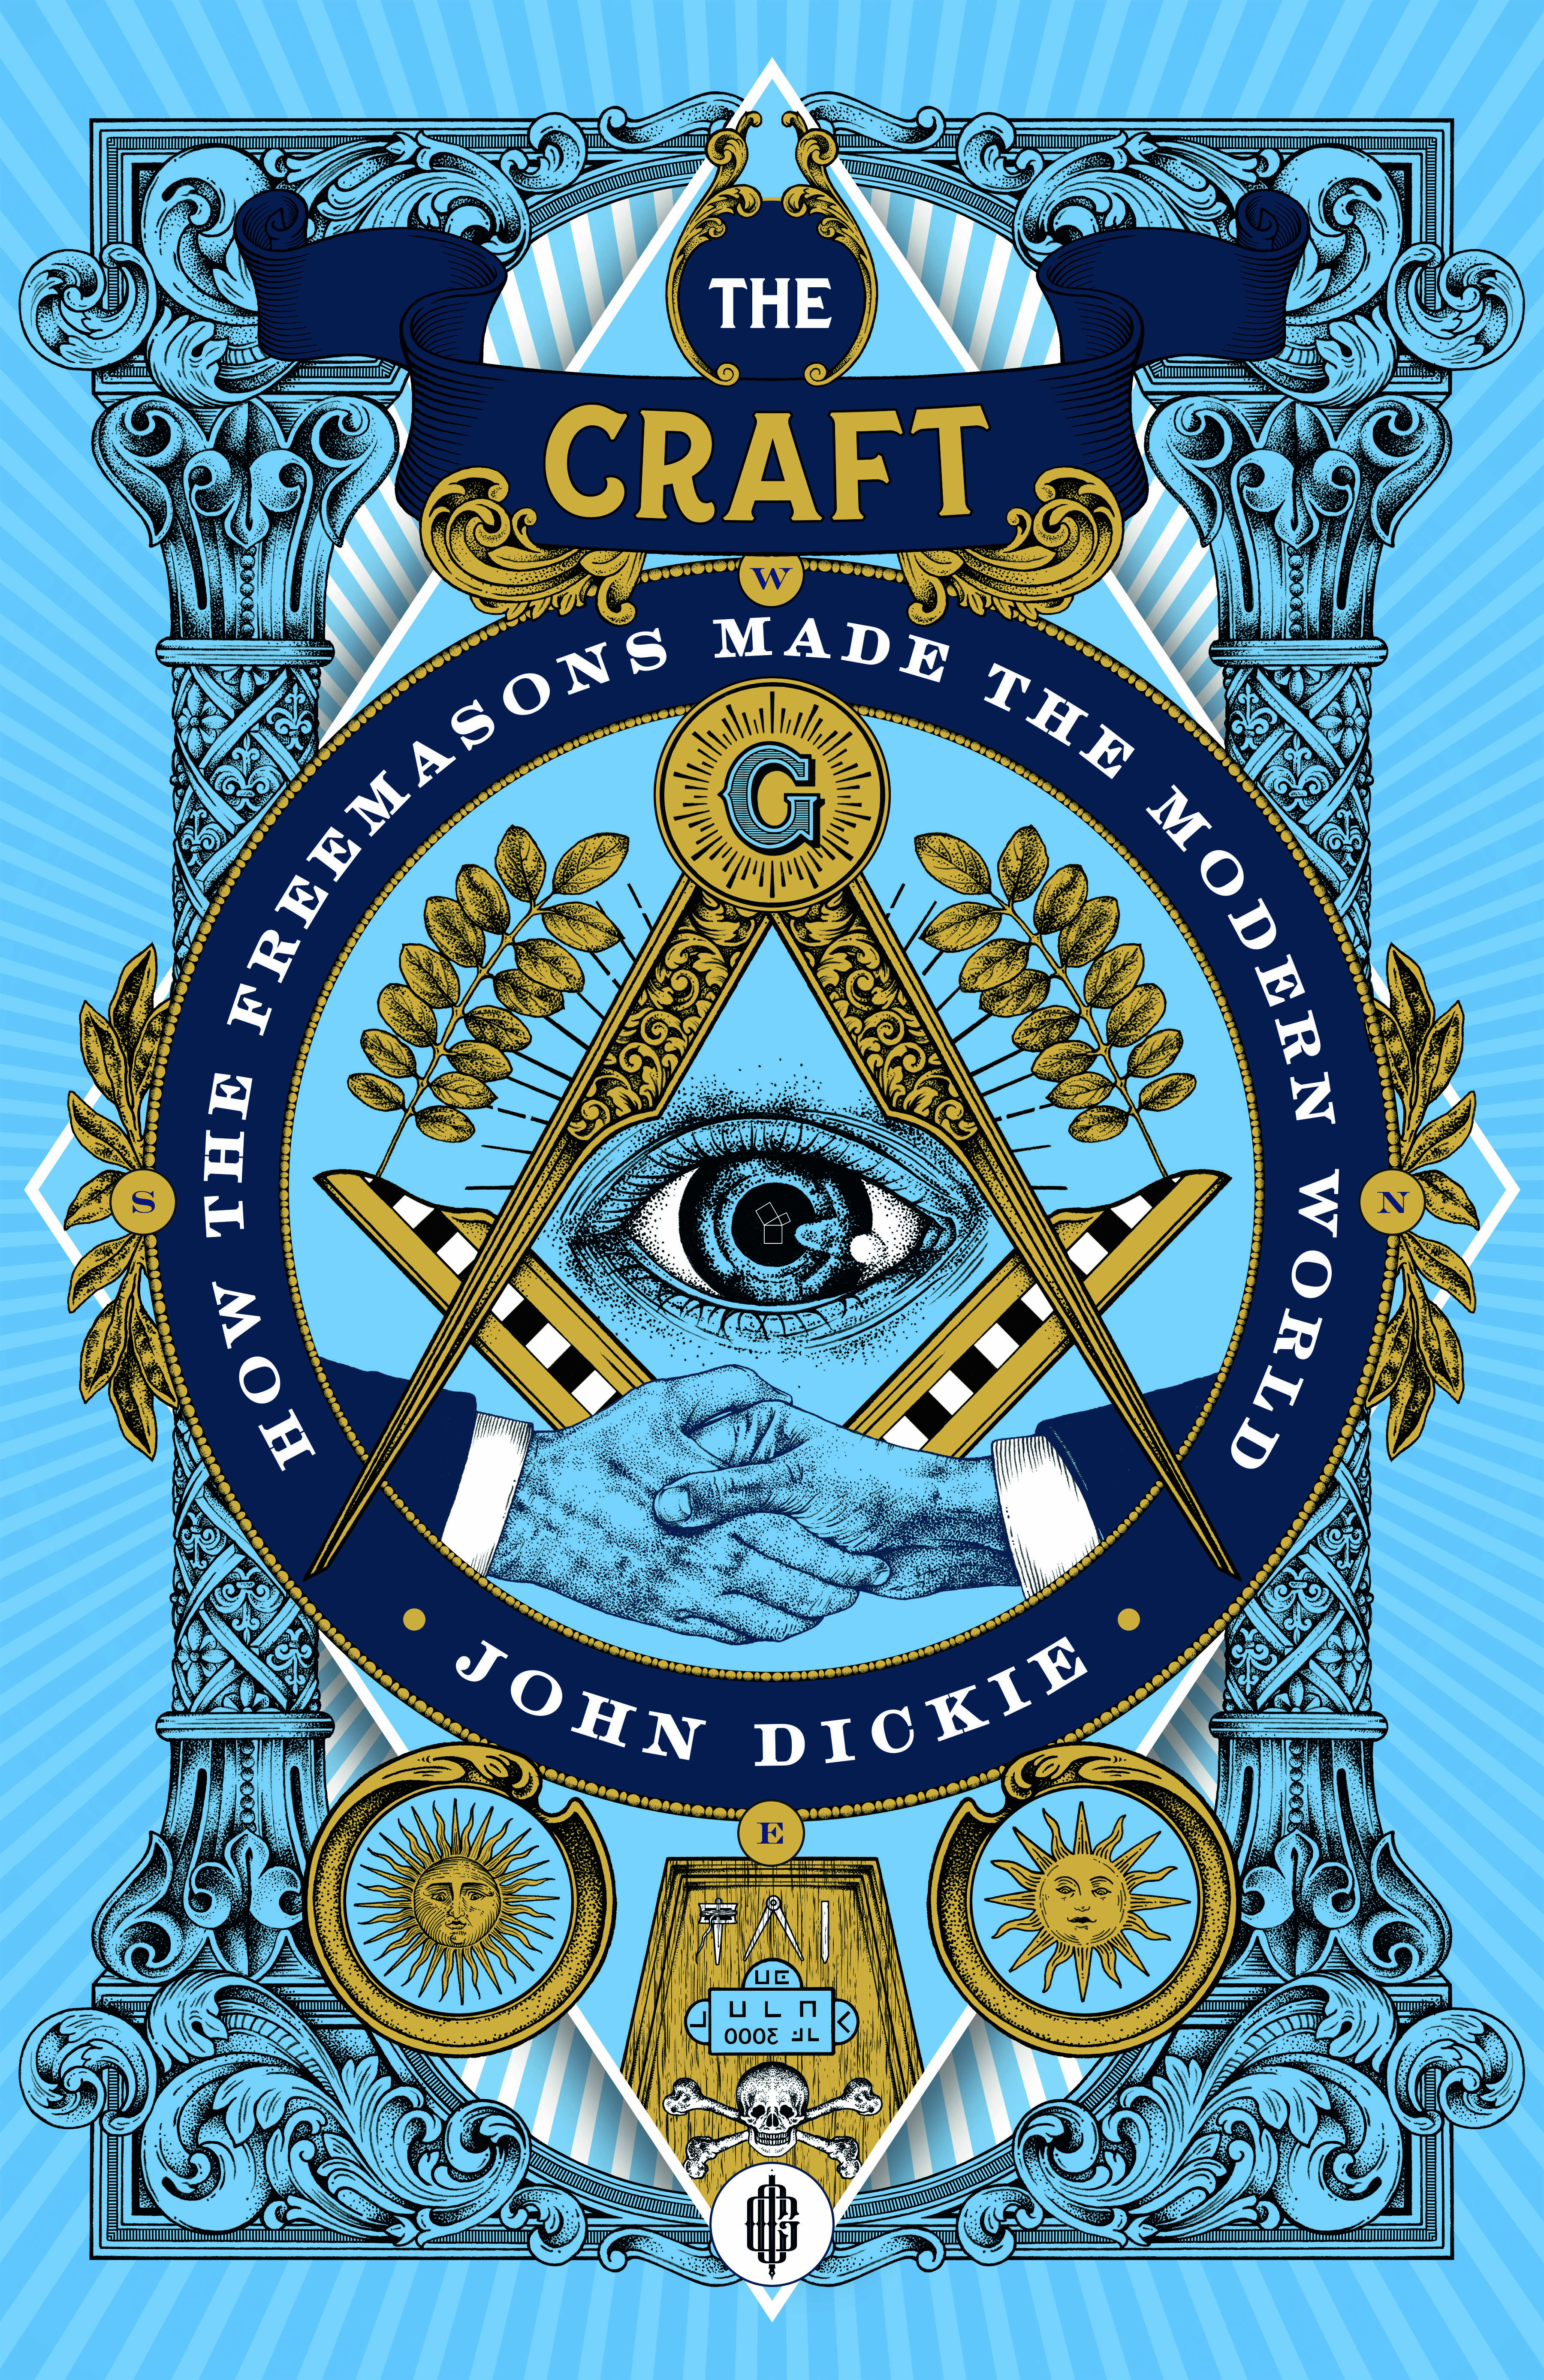 John Dickie's long-awaited history of Freemasonry, The Craft, is finally out | UCL – University College London